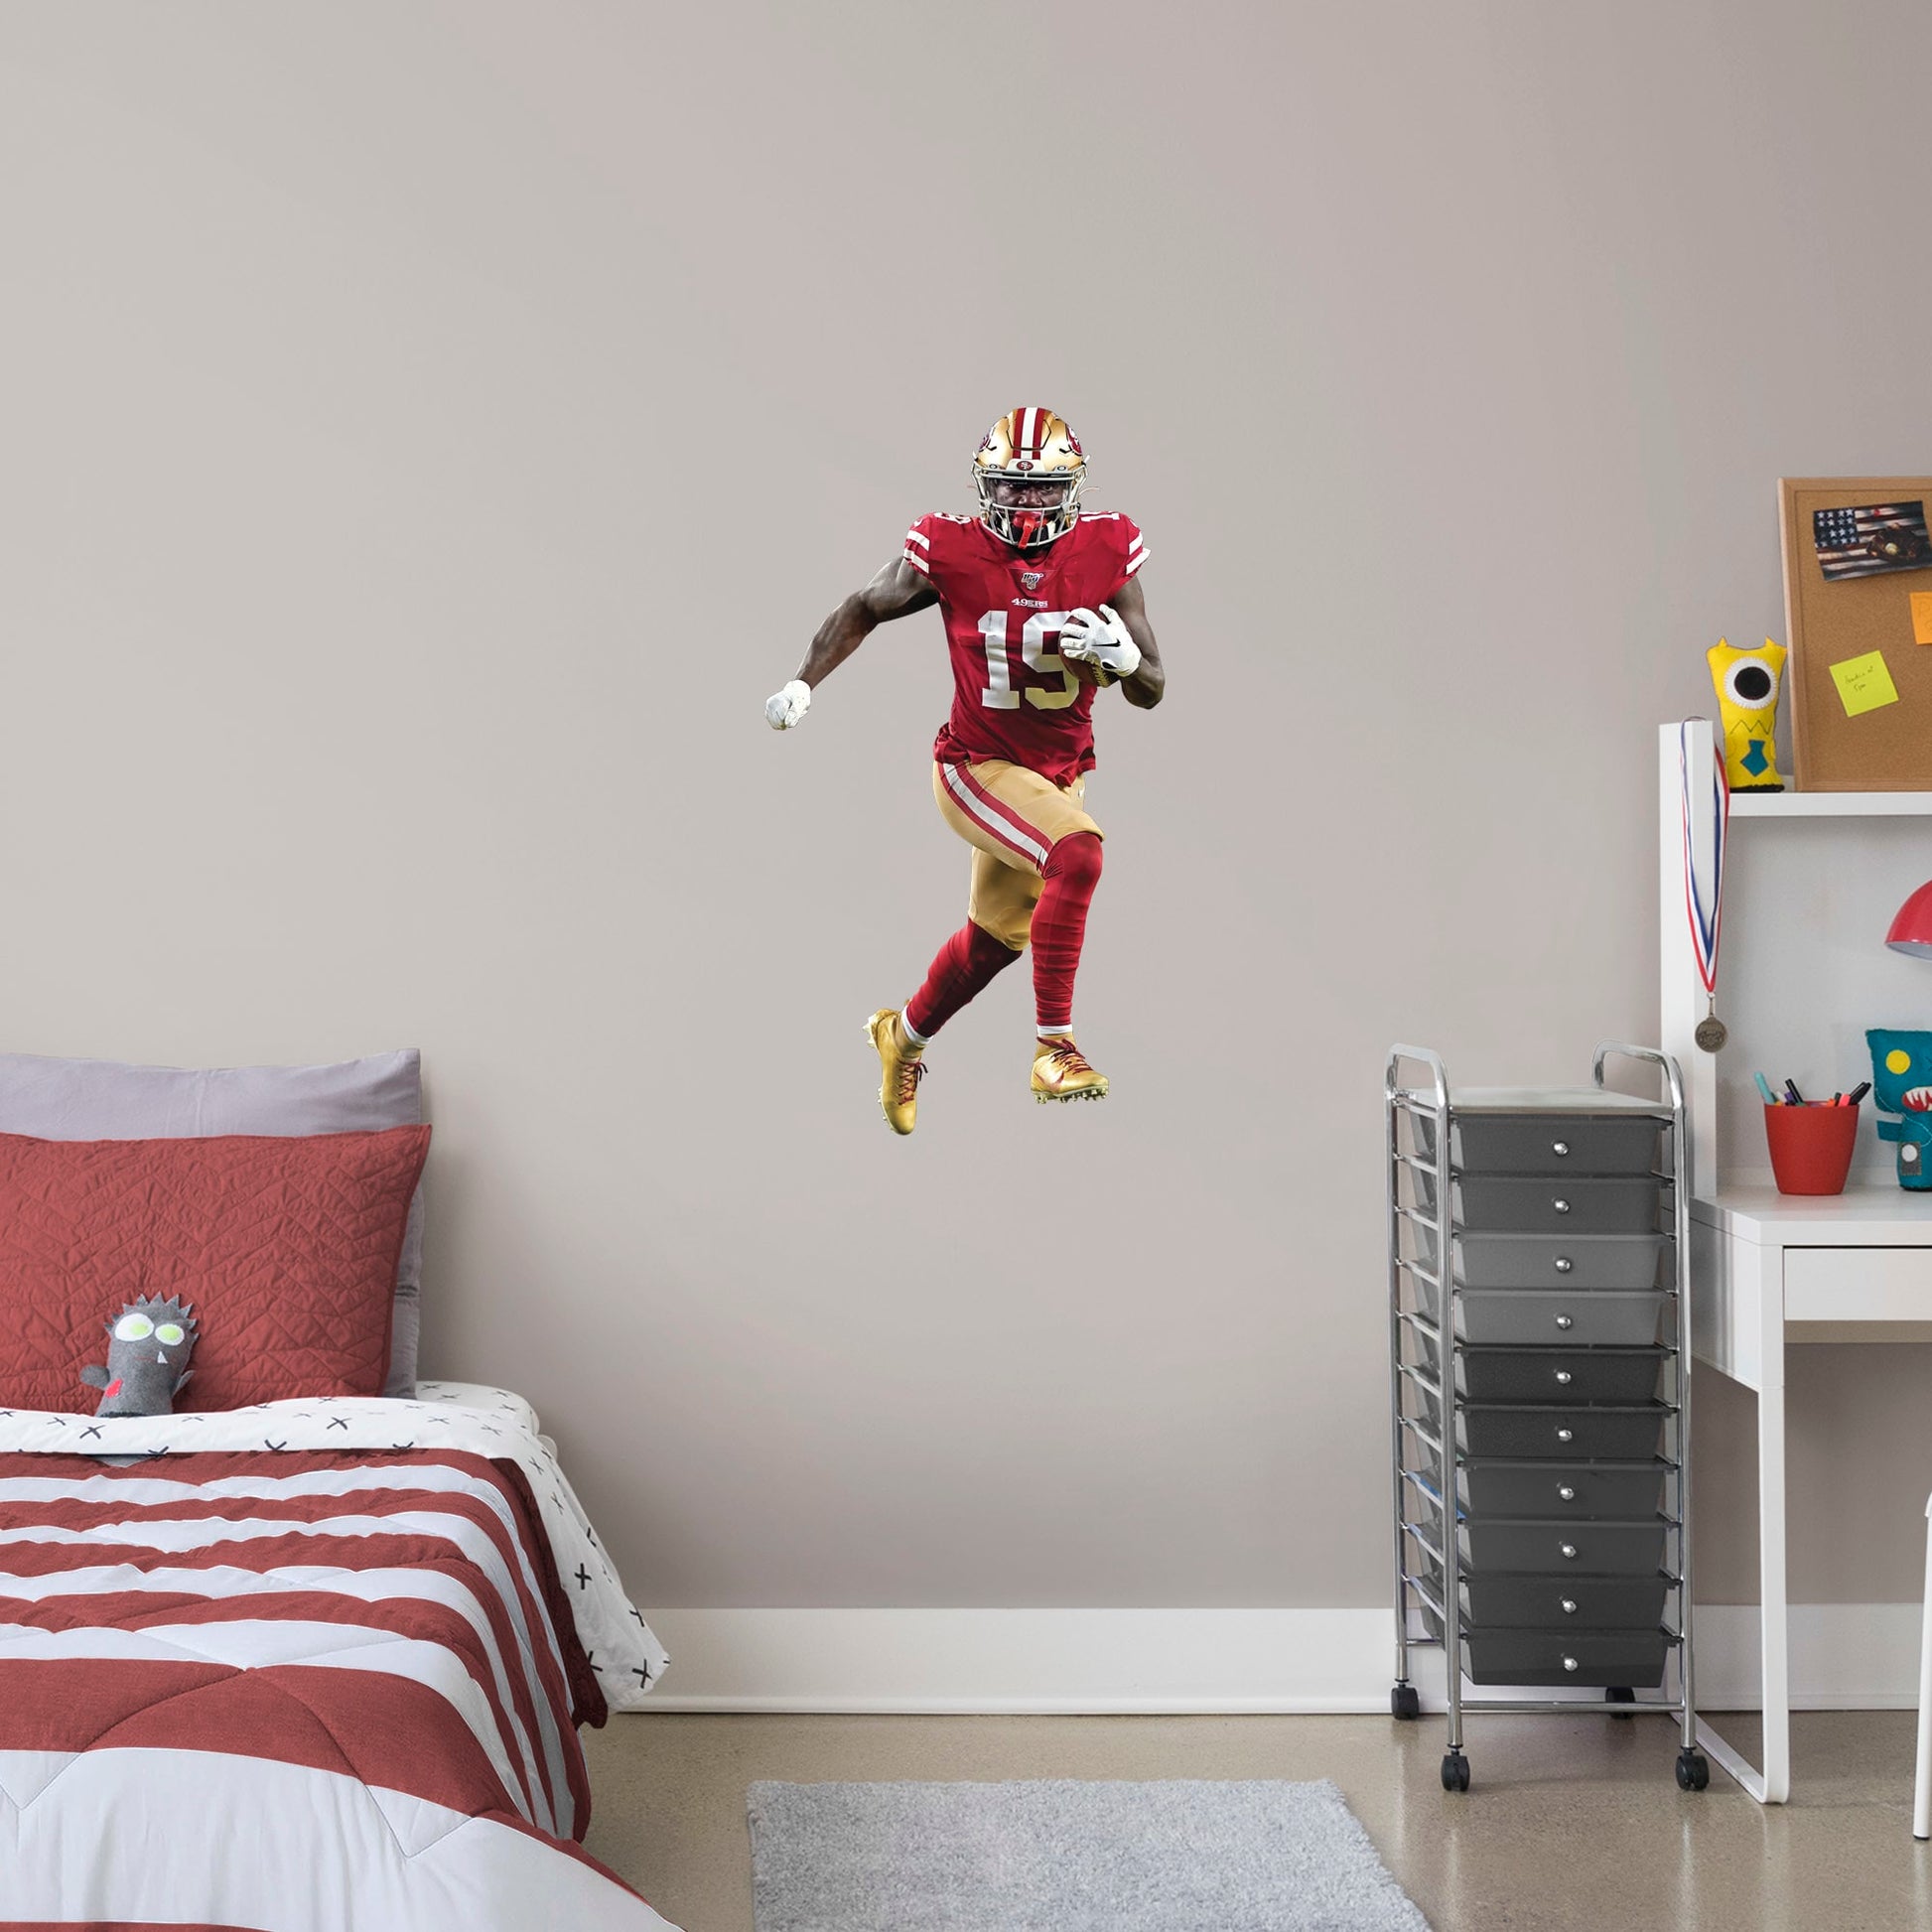 X-Large Athlete + 2 Decals (21"W x 39"H) Deebo Samuel is one of the most exciting players in the NFL and you can show your support with this high-quality removable wall decal! Place this durable vinyl decal on any wall and wide receiver Deebo can dominate your room, office, or man cave like he helps the San Francisco 49ers dominate the league! This decal can be easily applied and removed on almost any surface, so this speedster can follow you everywhere you go! Let���s go, Niners!